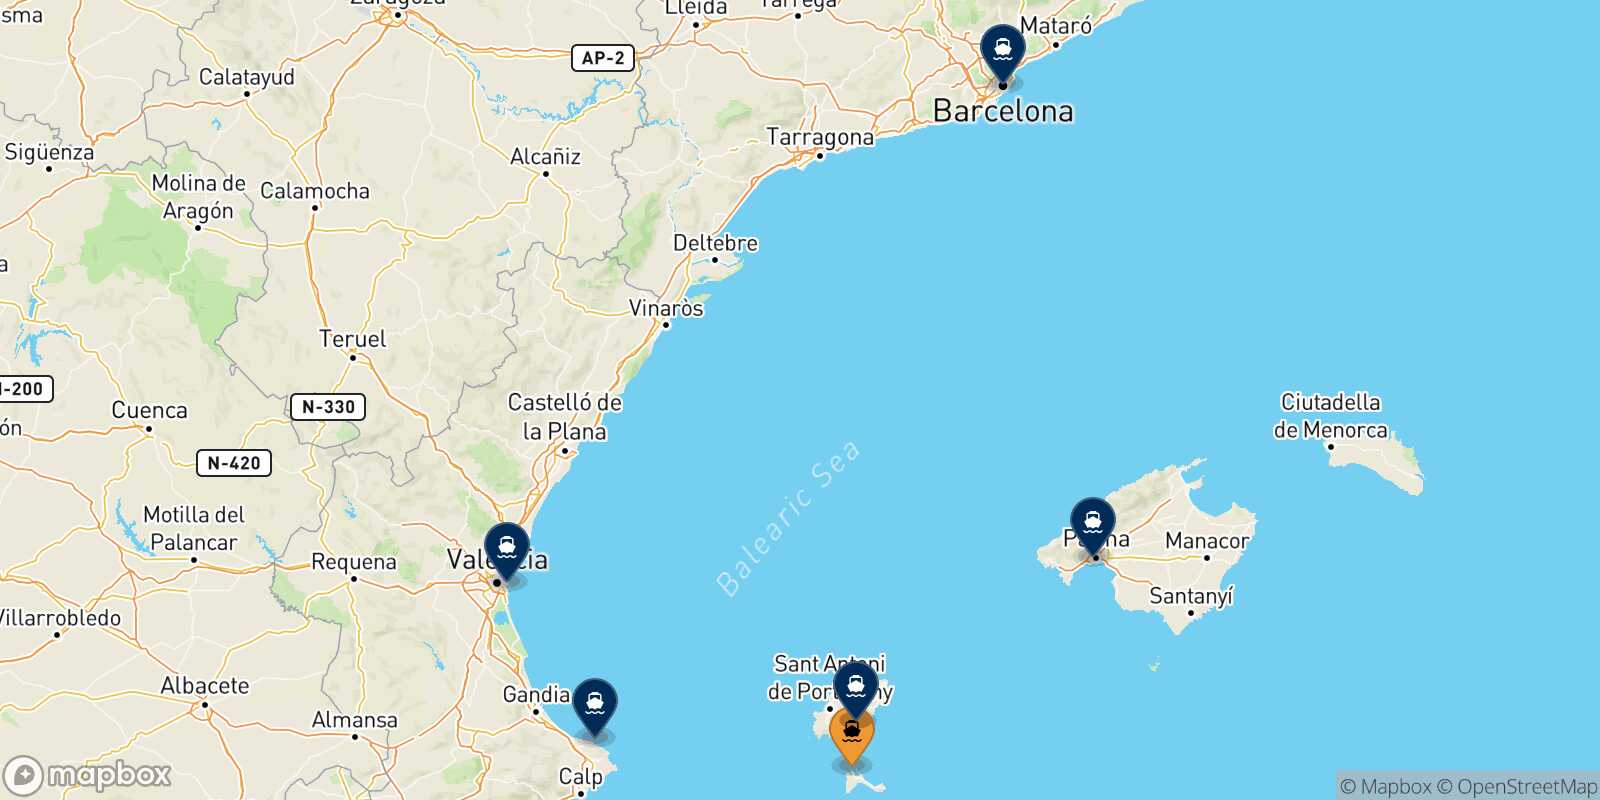 Map of the destinations reachable from Formentera